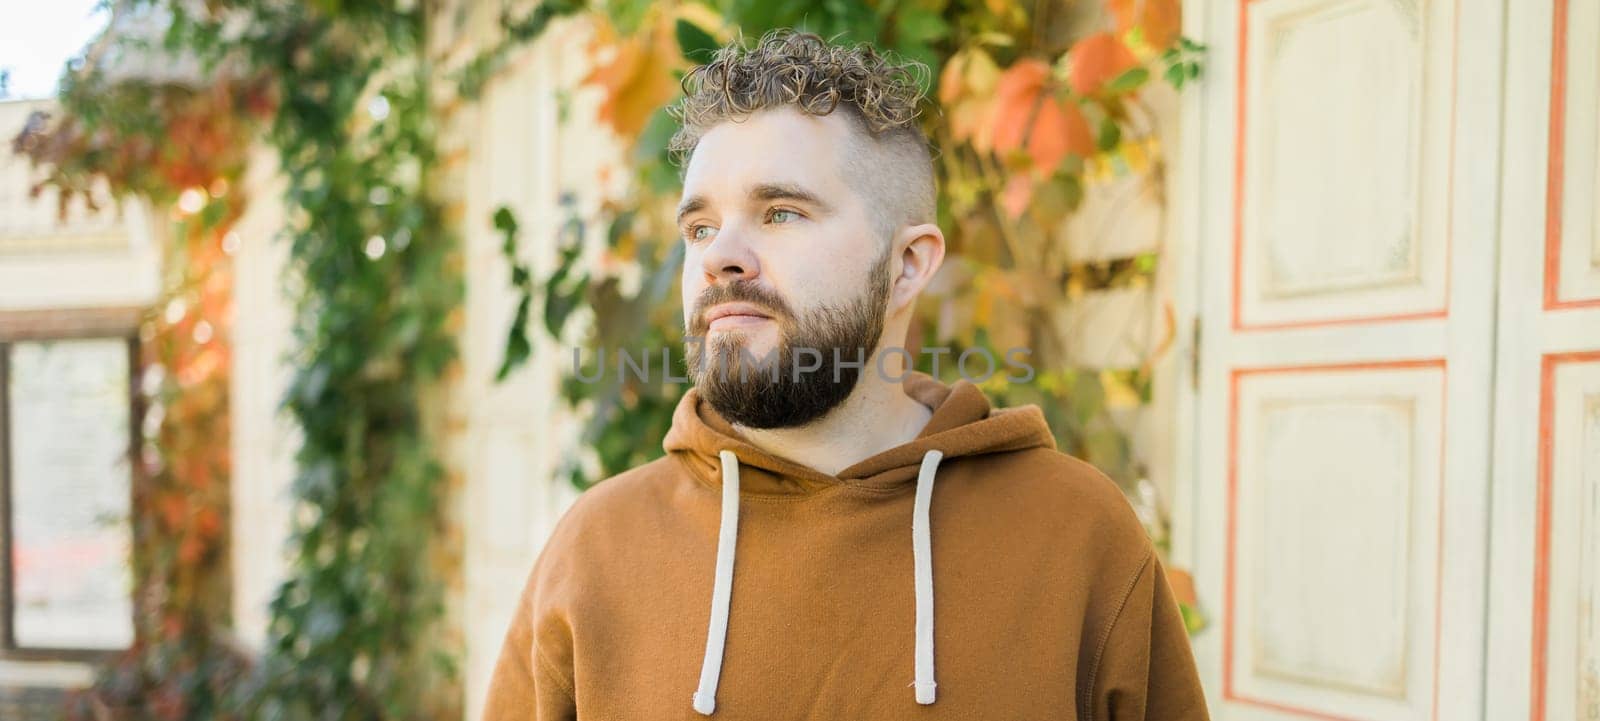 Close up shot of curly European male with beard wears switshot outdoors. Handsome man with crisp light hair